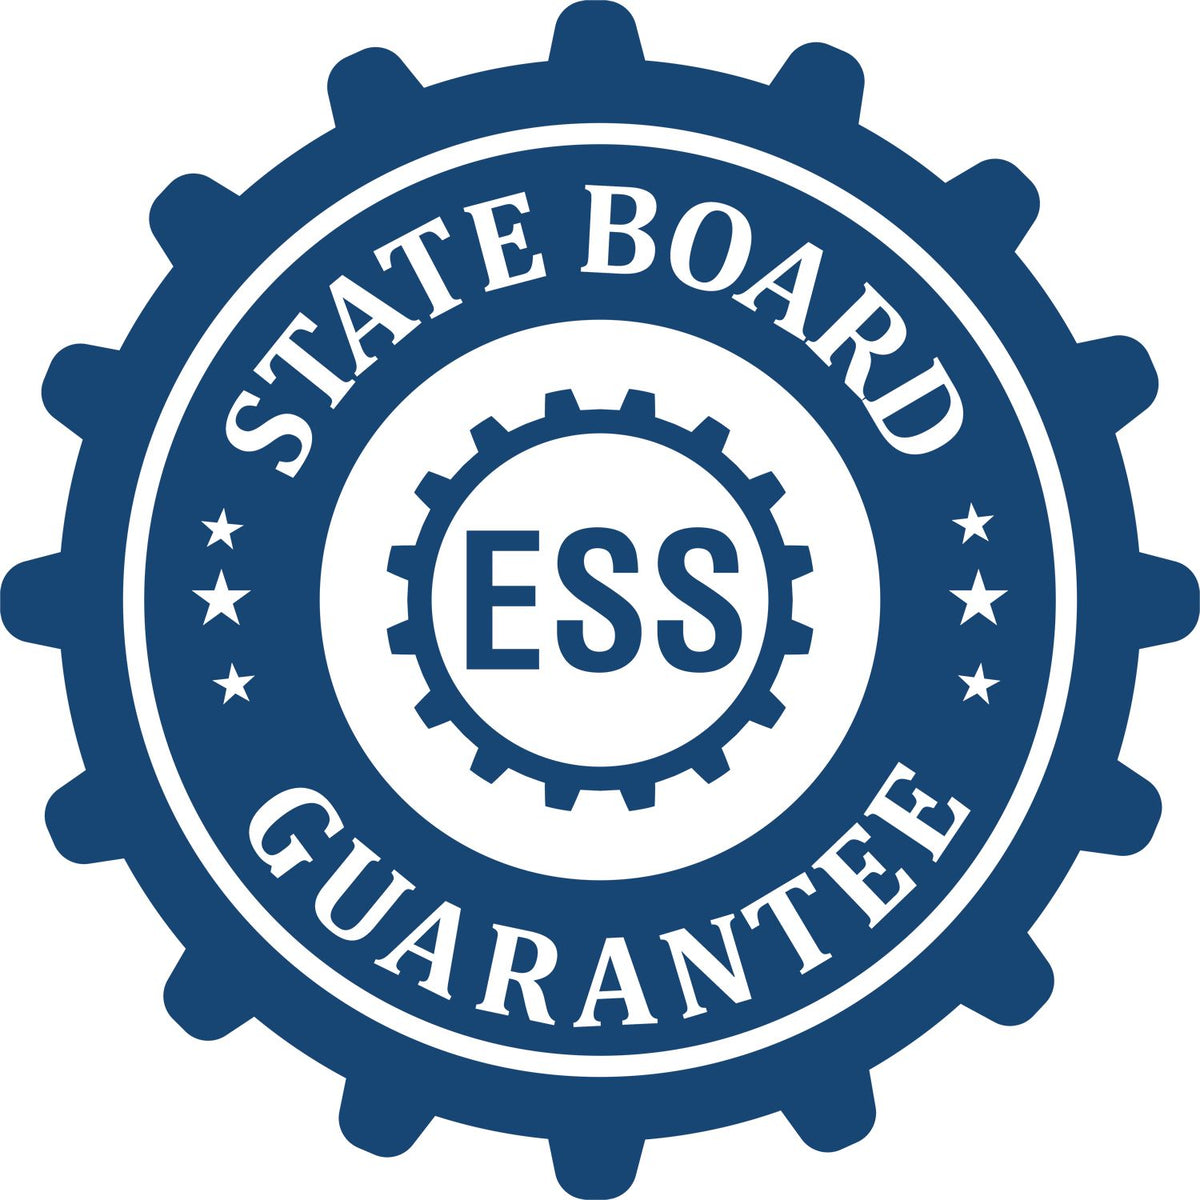 An emblem in a gear shape illustrating a state board guarantee for the Gift New Jersey Engineer Seal